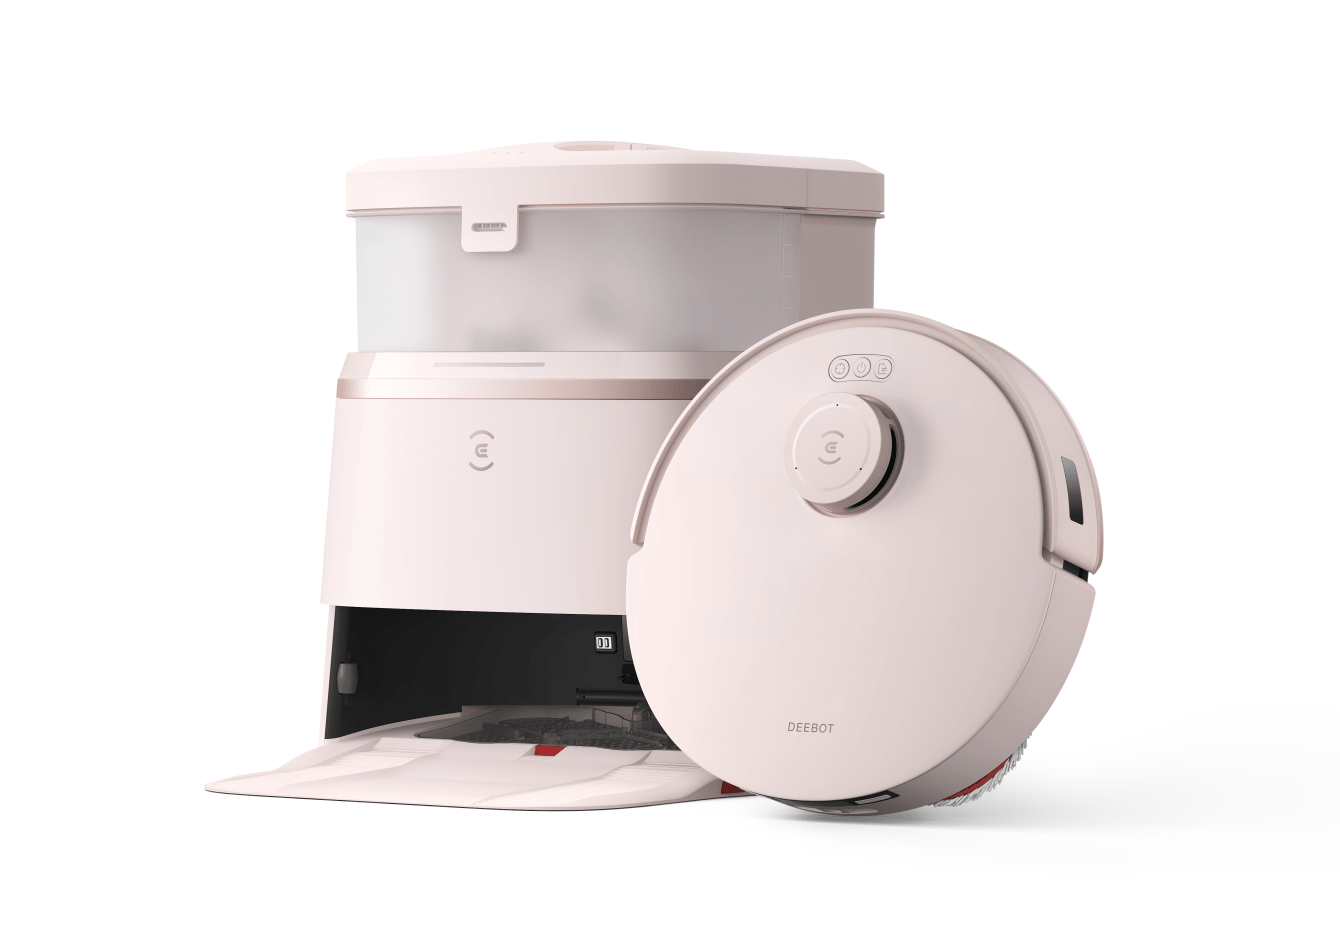 Ecovacs revolutionizes home cleaning with the new Deebot T30 robot